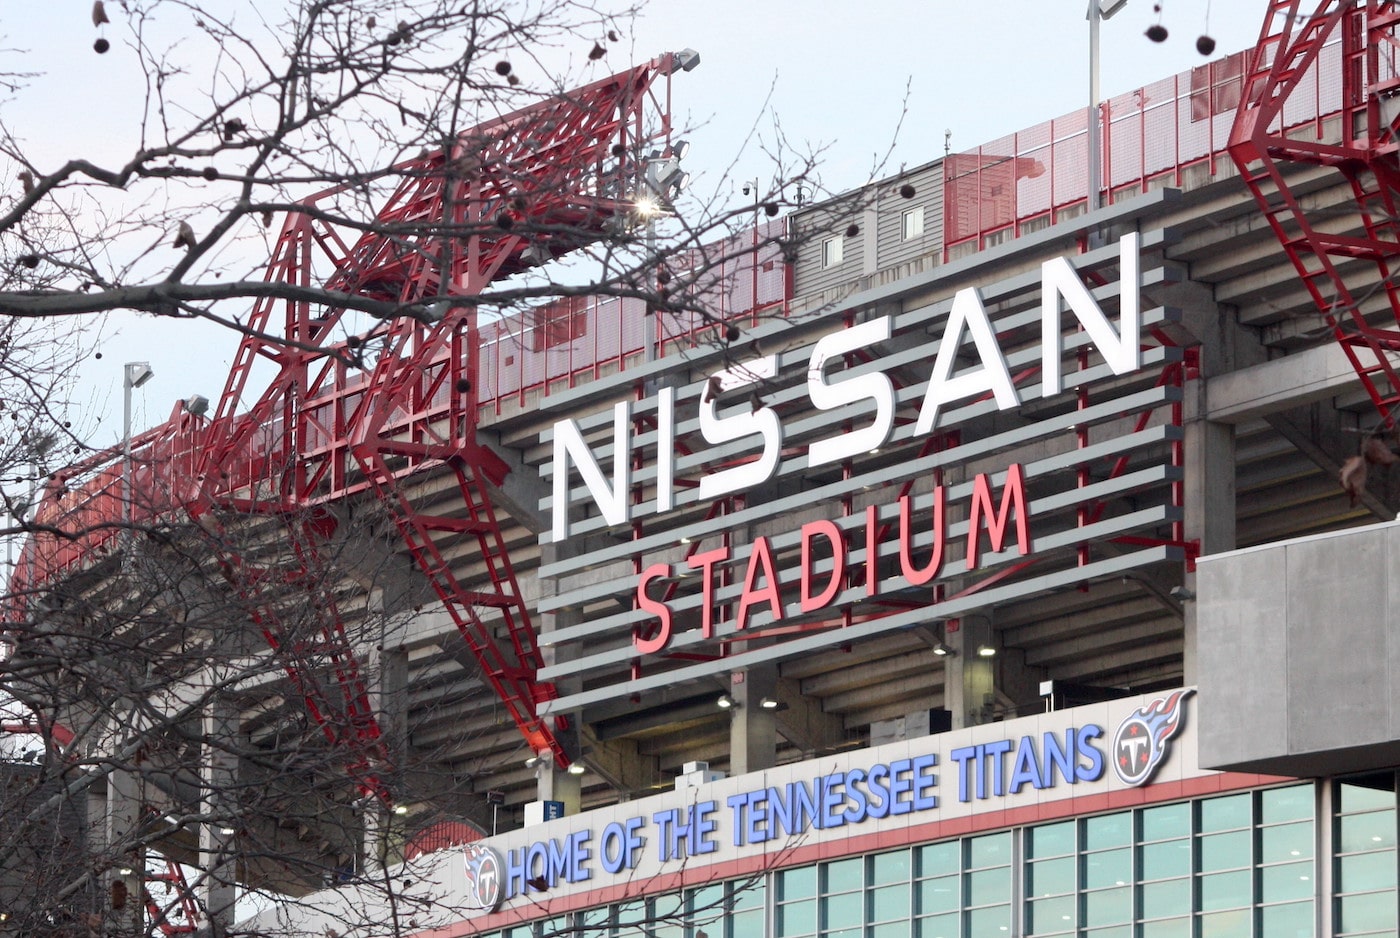 The Tennessee Titans may be getting a new stadium. What questions do you  have about the plan?